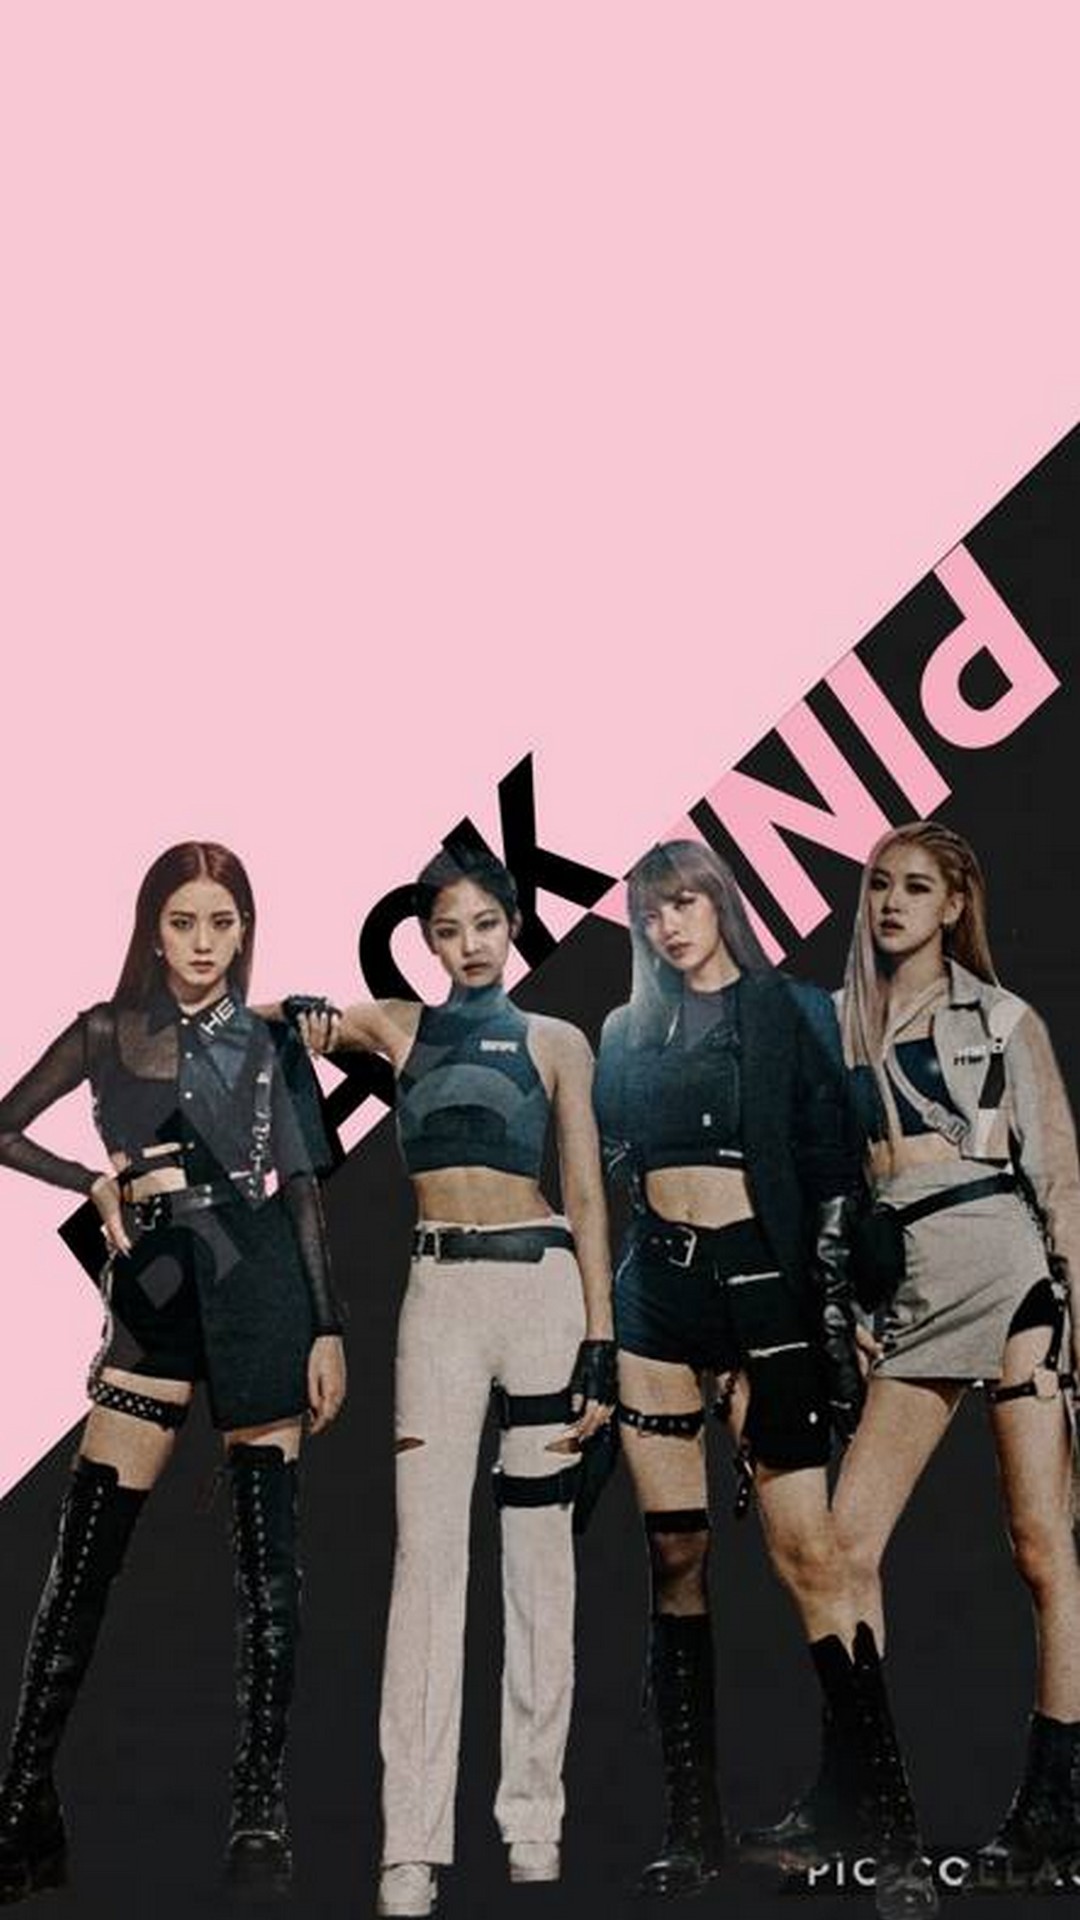 Blackpink Wallpaper For Android With High Resolution 1080x1920 Wallpaper Teahub Io